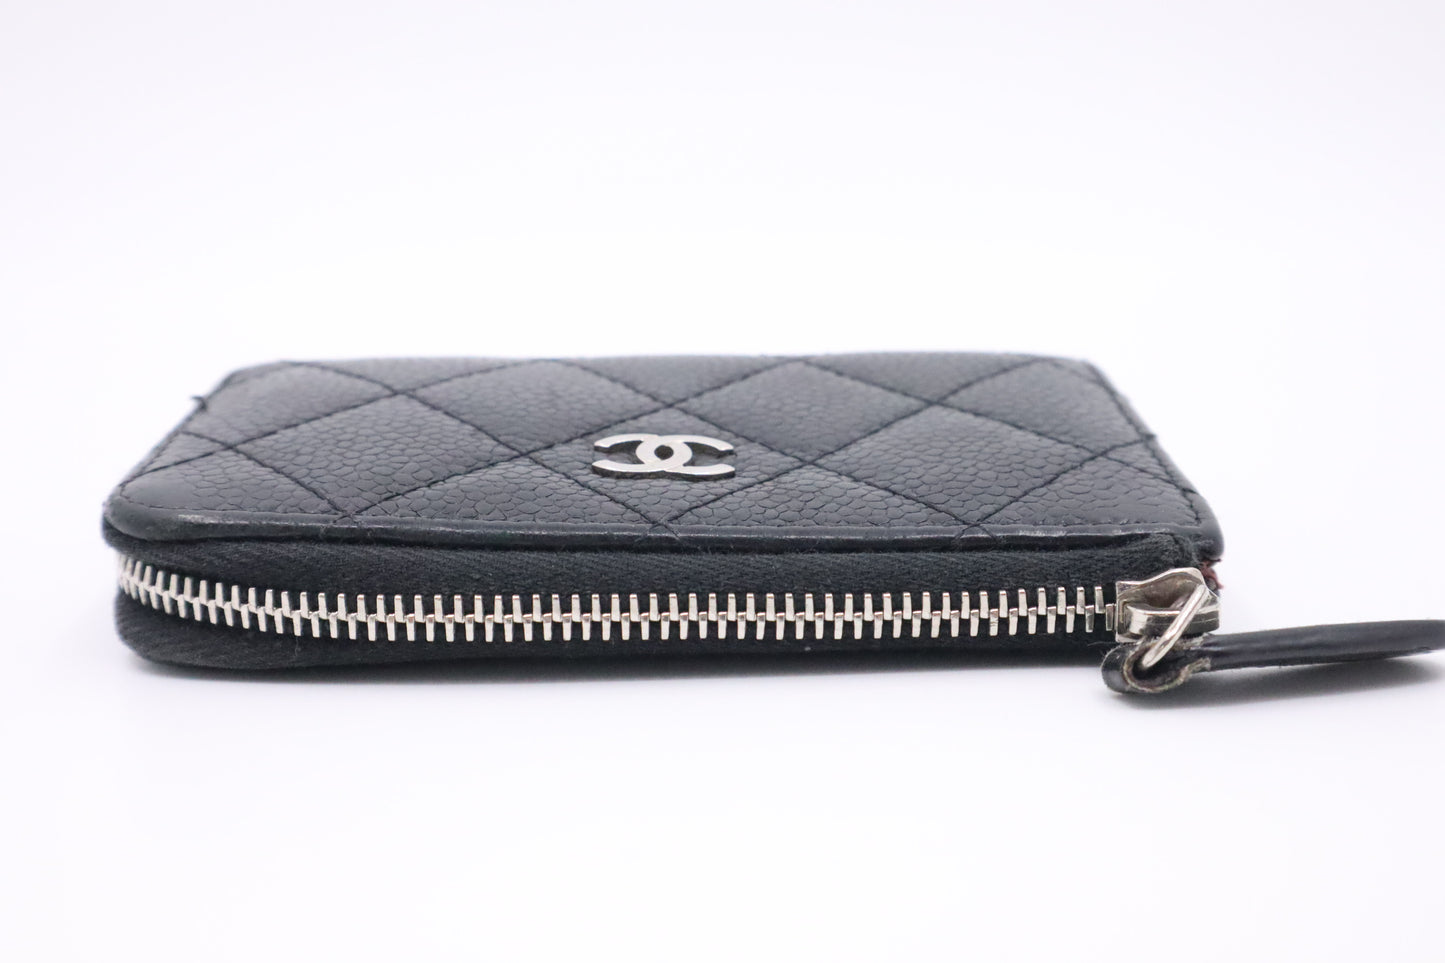 Chanel Card Case in Black Caviar Leather